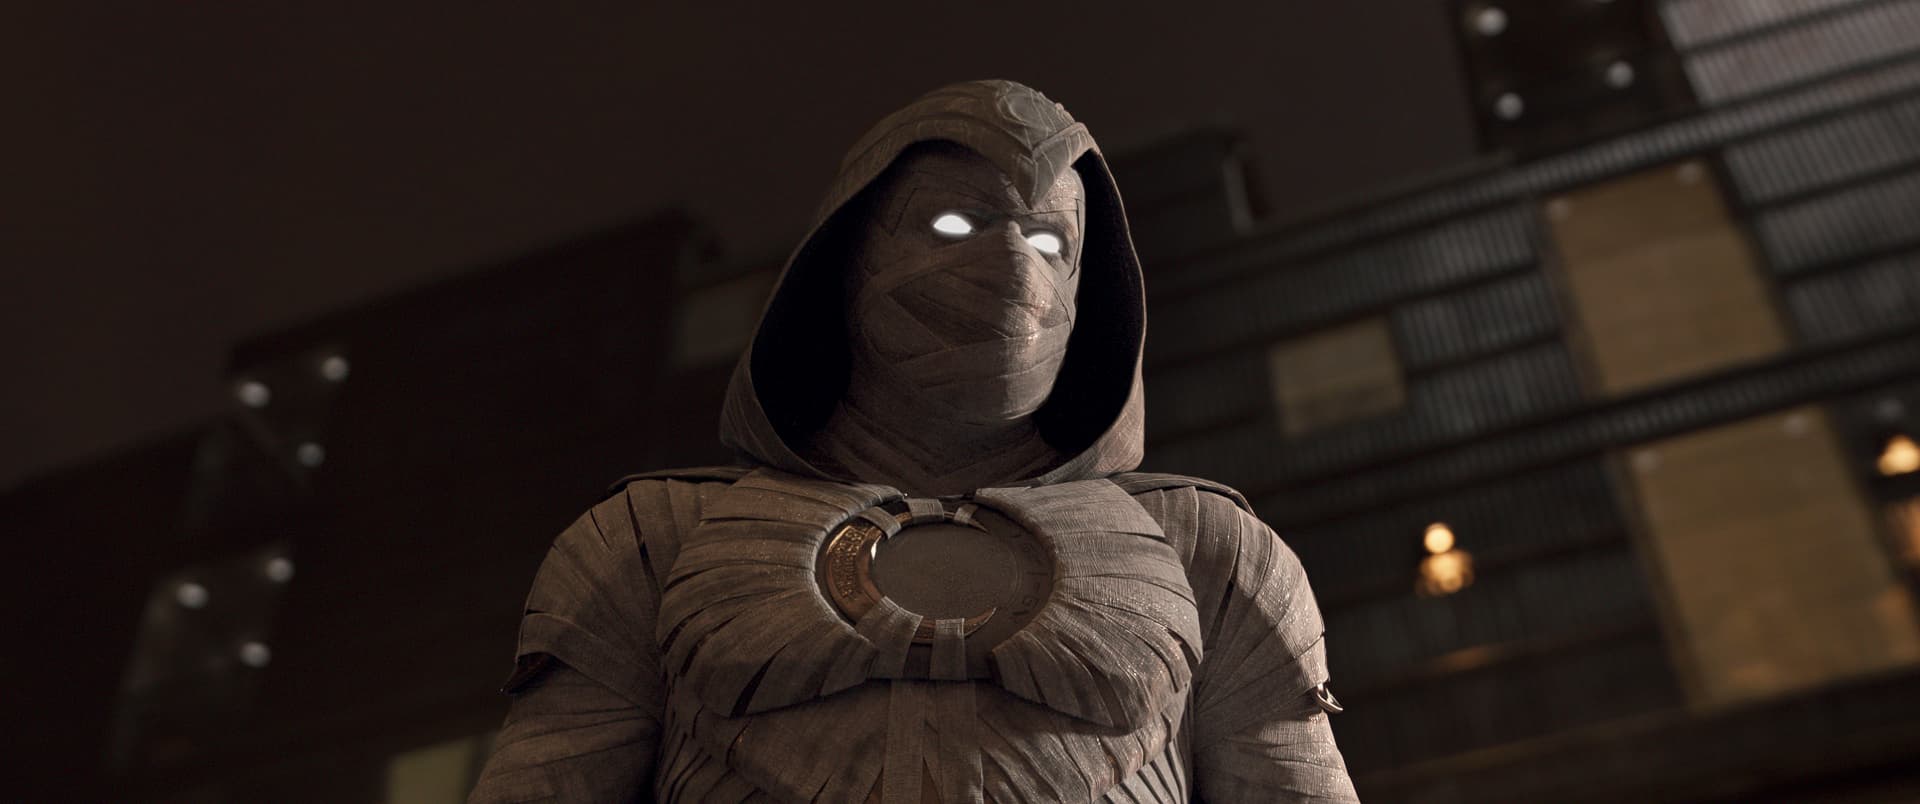 Moon Knight: Episode 2 Review 